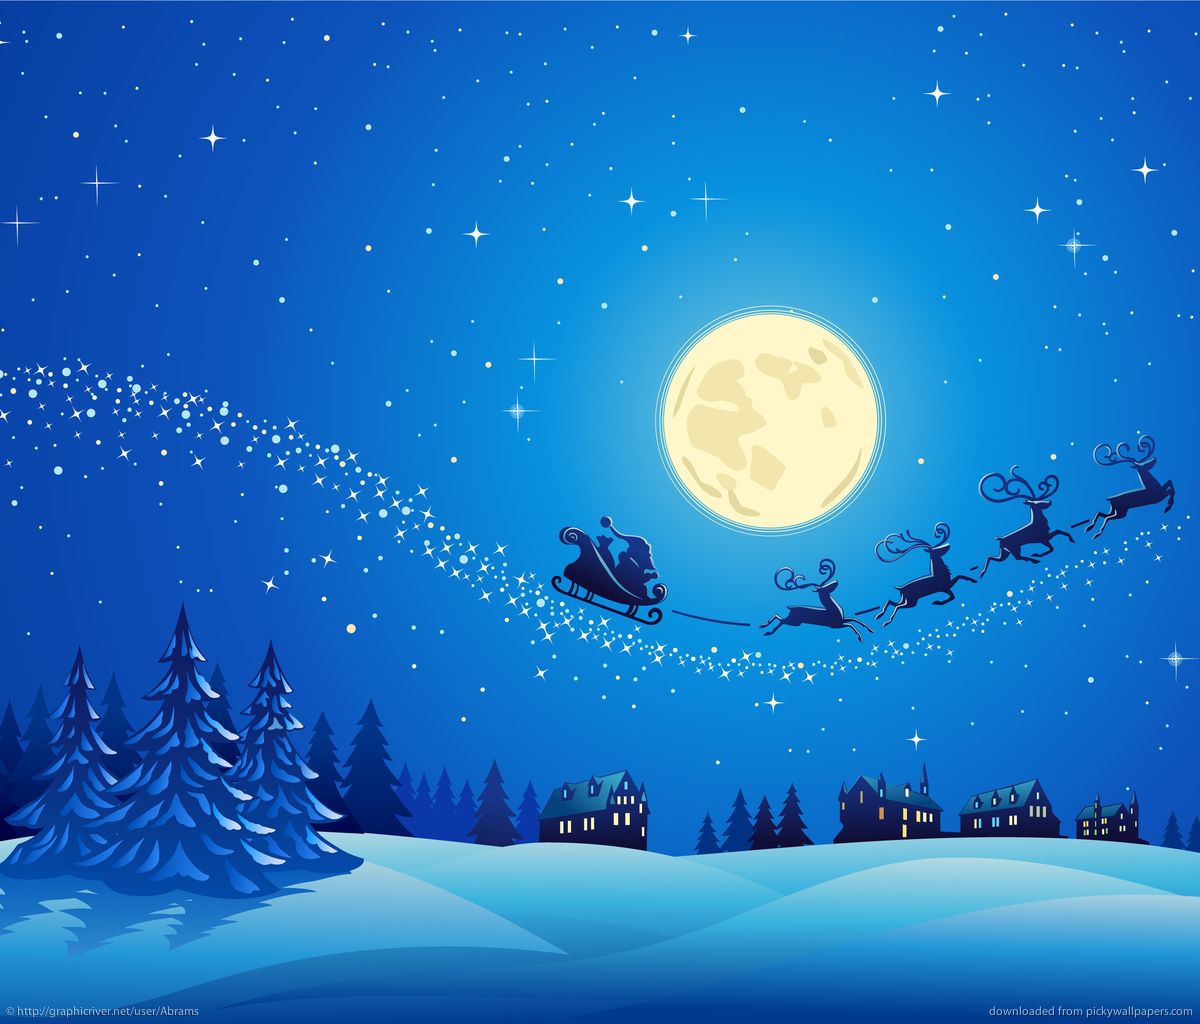 Download Santa Into The Winter Christmas Night 2 Wallpaper For